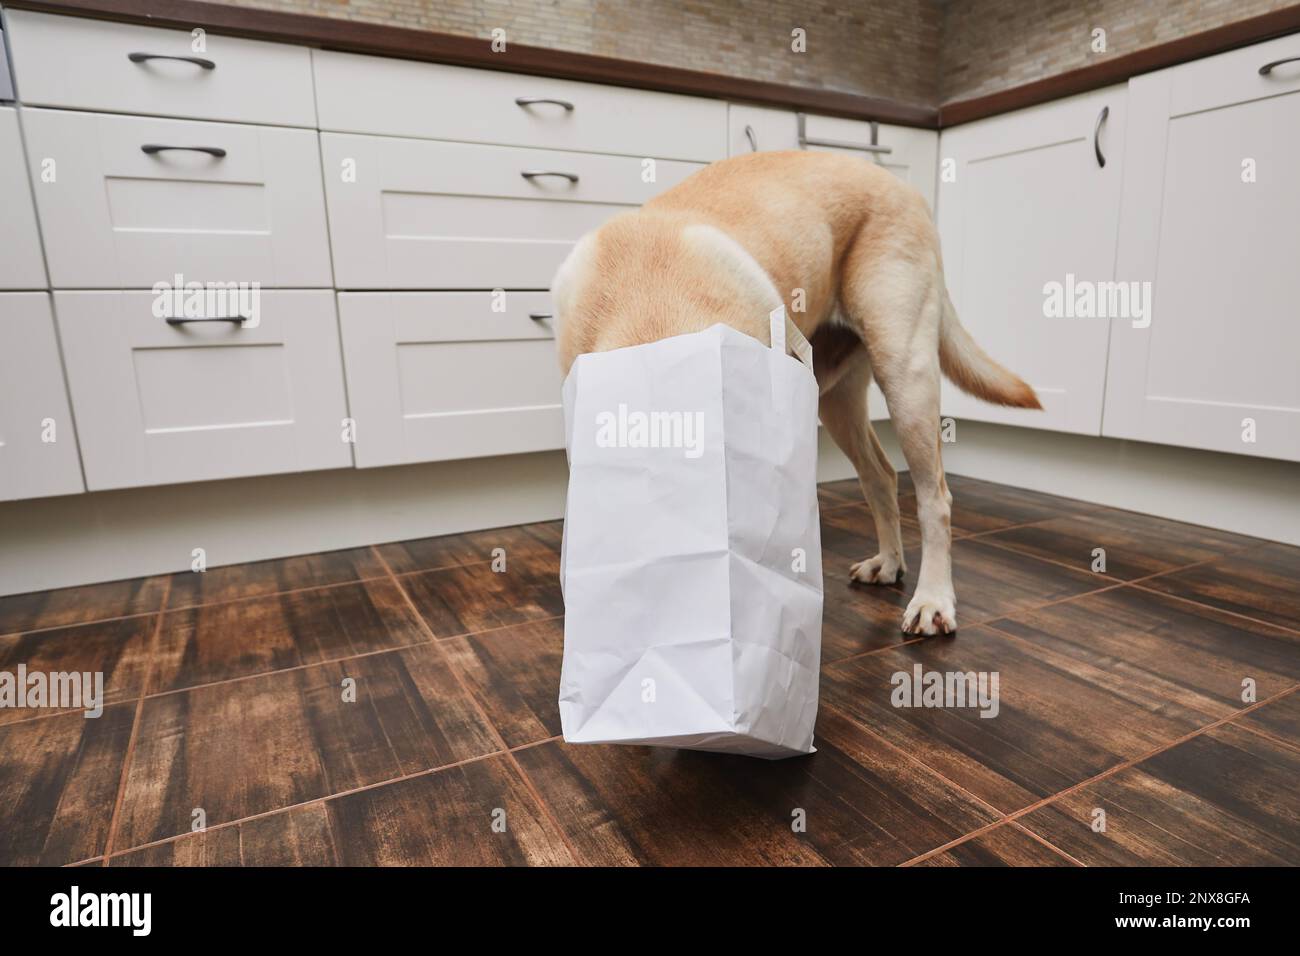 Naughty dog in home kitchen. Curious and hungry labrador retriever eating purchase from paper bag. Stock Photo